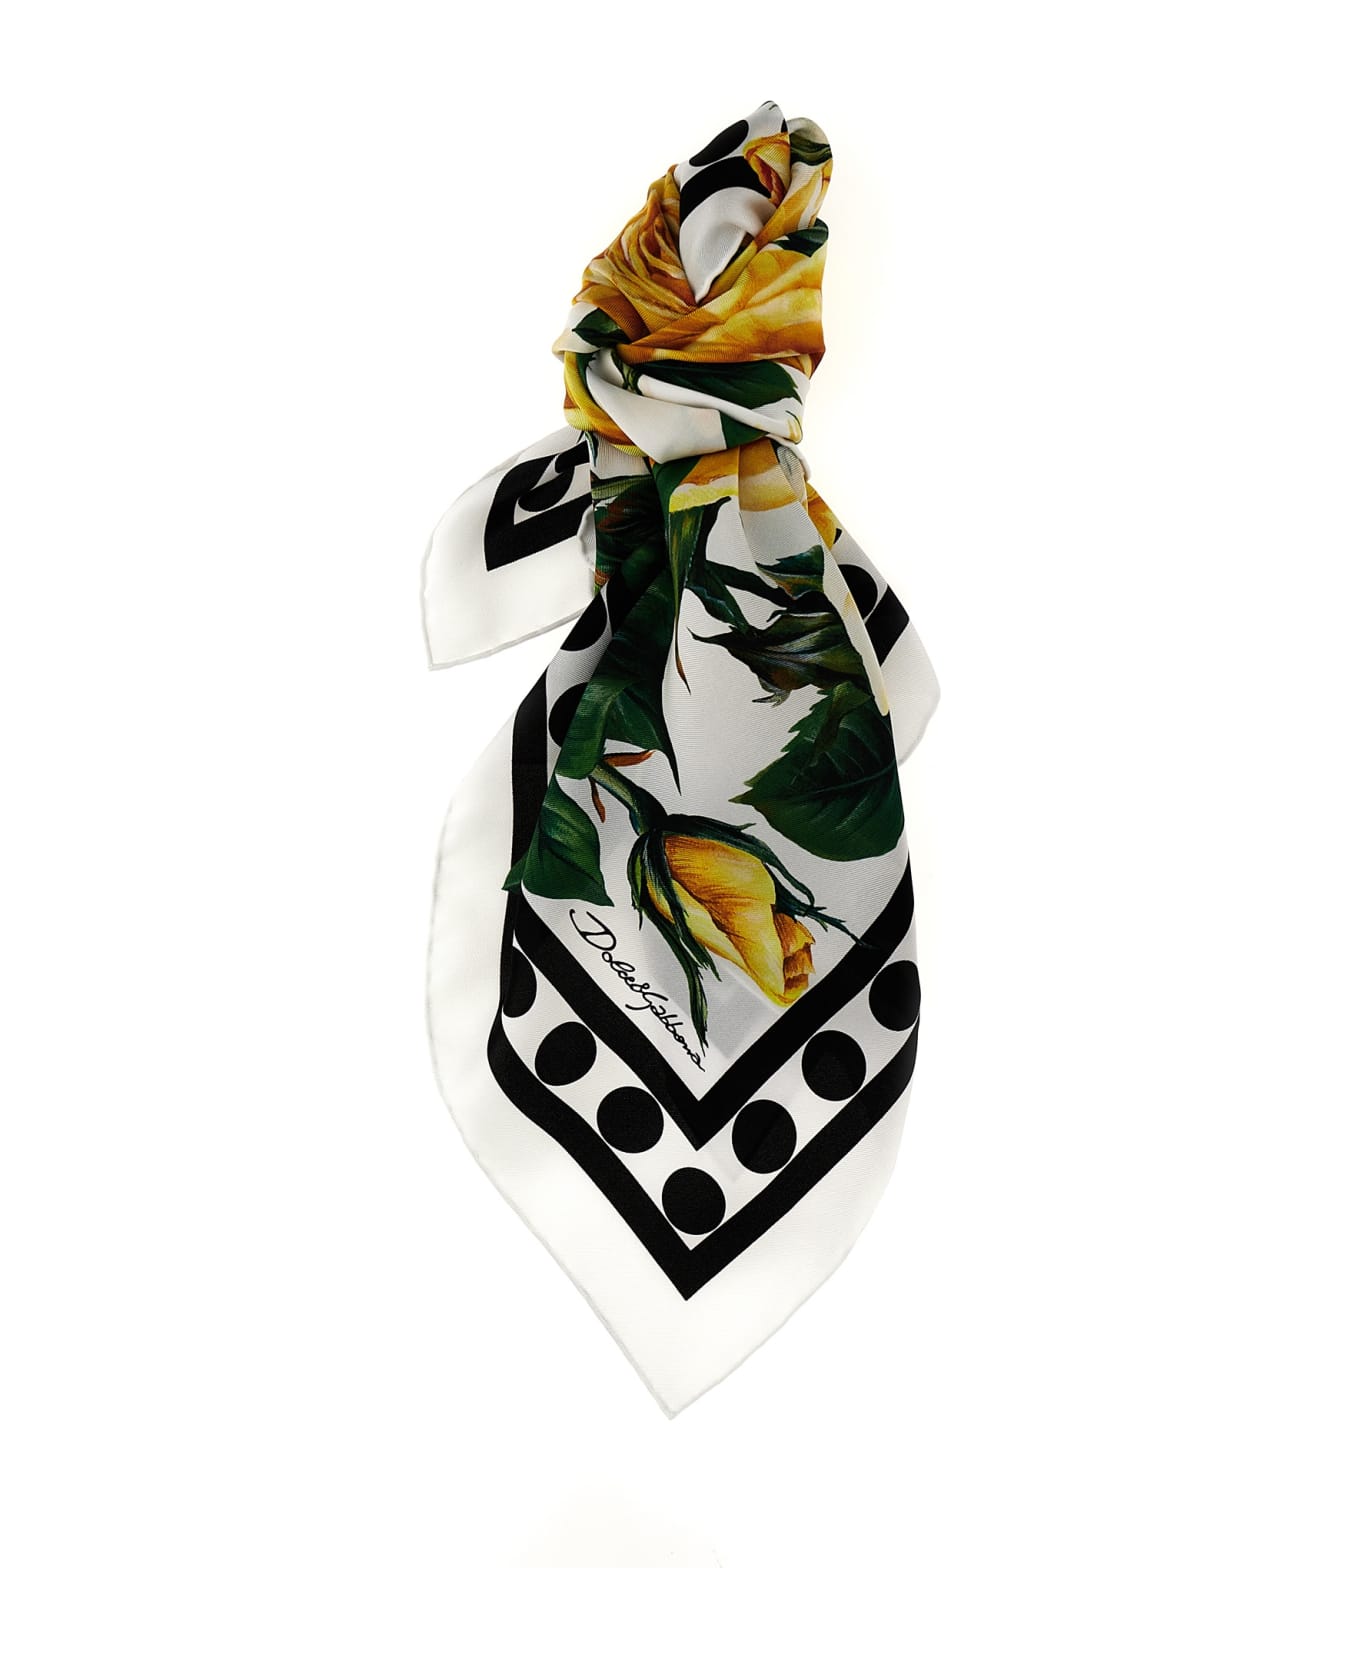 Dolce & Gabbana 'rose Gialle' Scarf - Multicolor スカーフ＆ストール